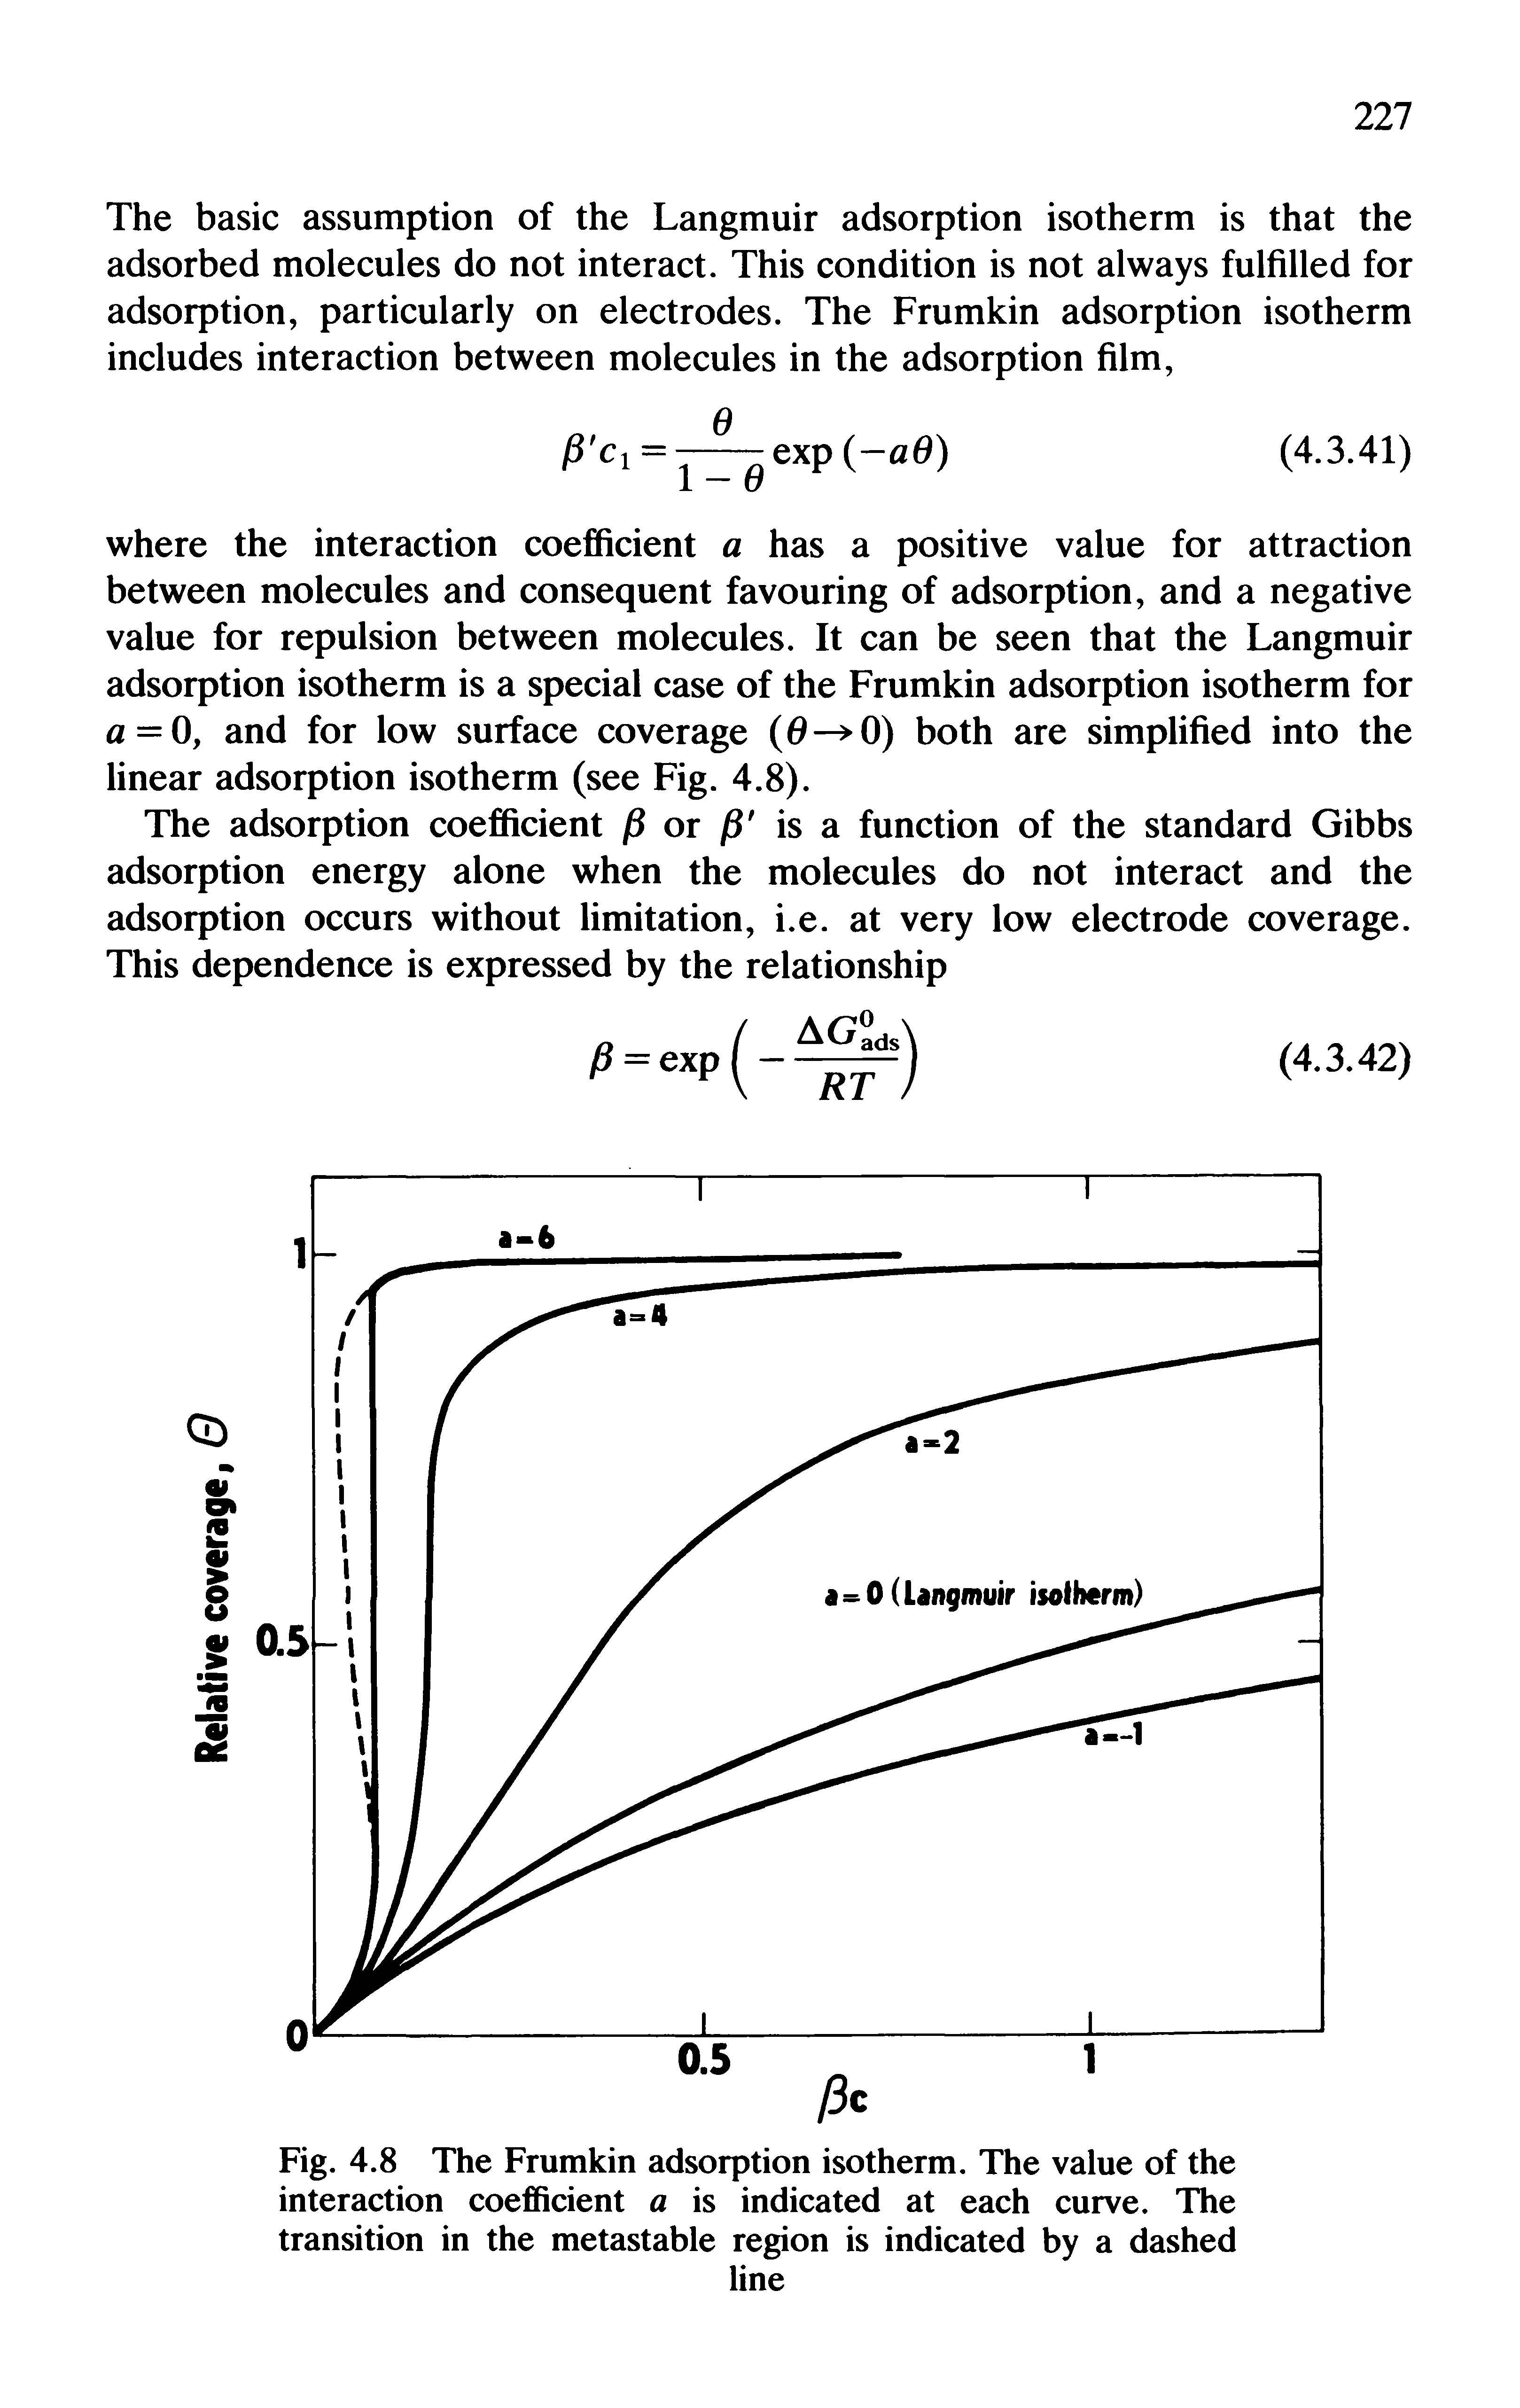 Fig. 4.8 The Frumkin adsorption isotherm. The value of the interaction coefficient a is indicated at each curve. The transition in the metastable region is indicated by a dashed...